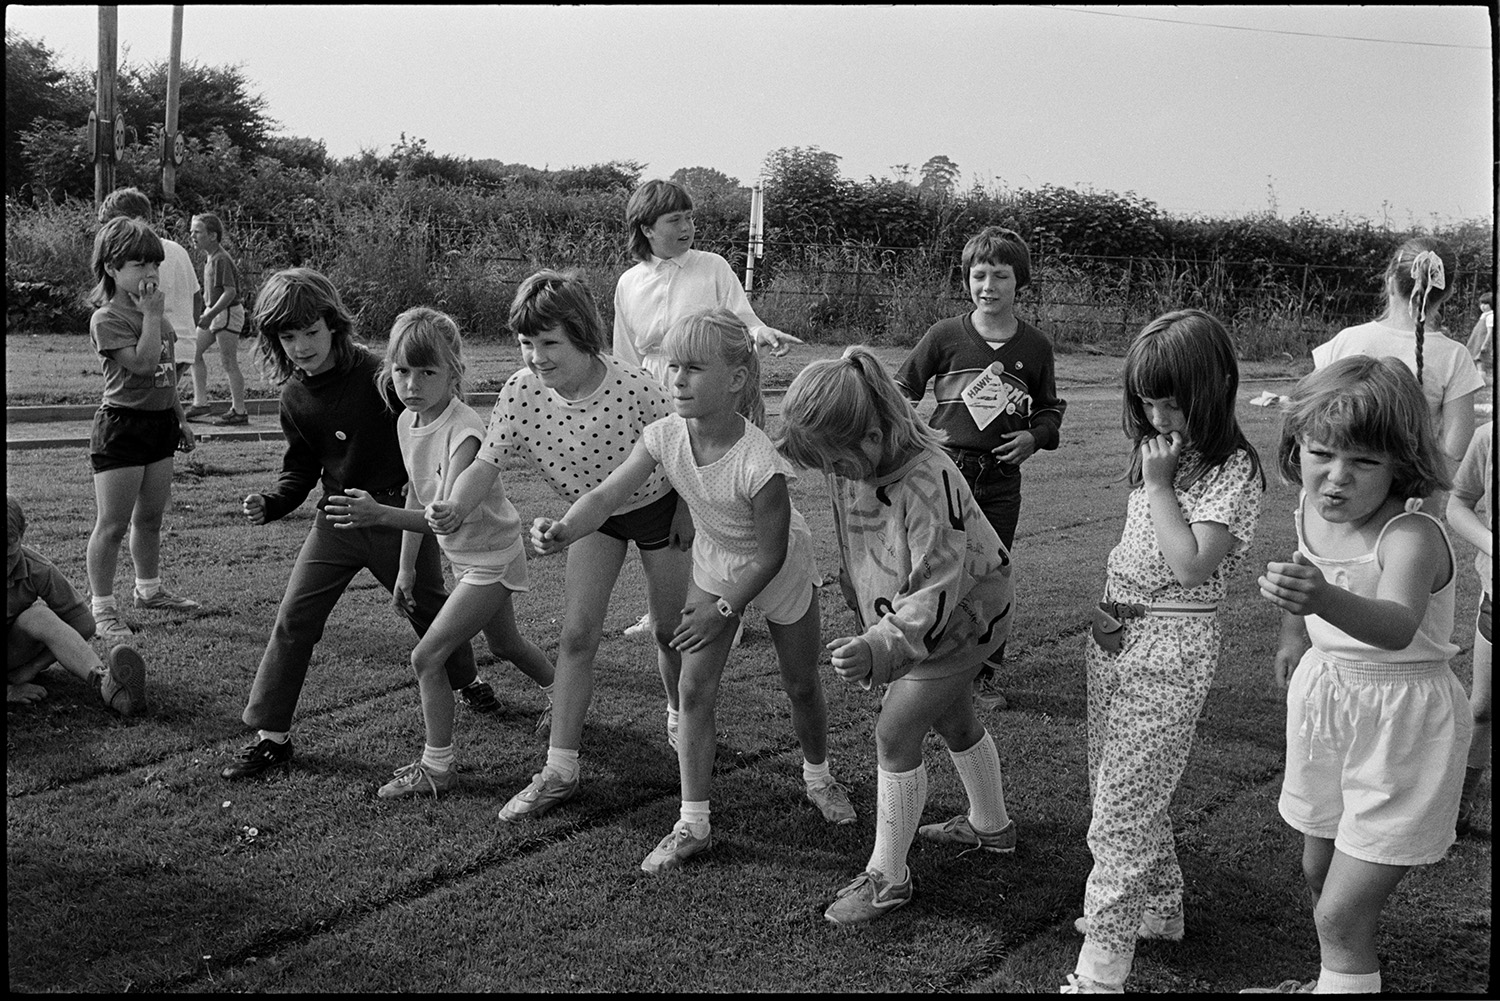 Children's sports.
[A group of girls lining up for the start of a race on Sports Day at Chulmleigh.]